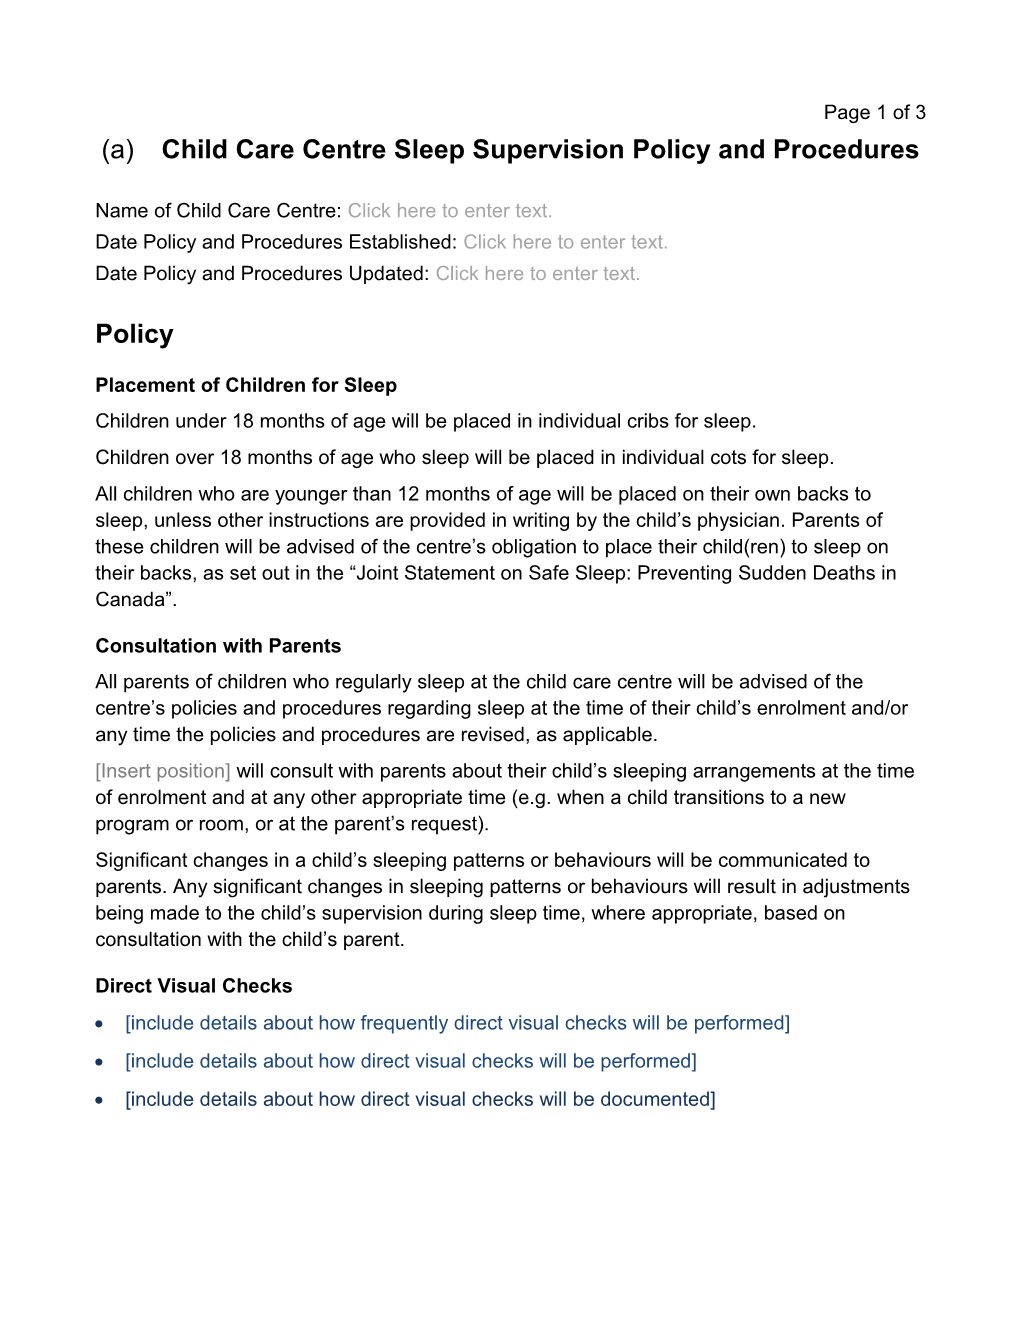 Child Care Centre Sleep Supervision Policy and Procedures